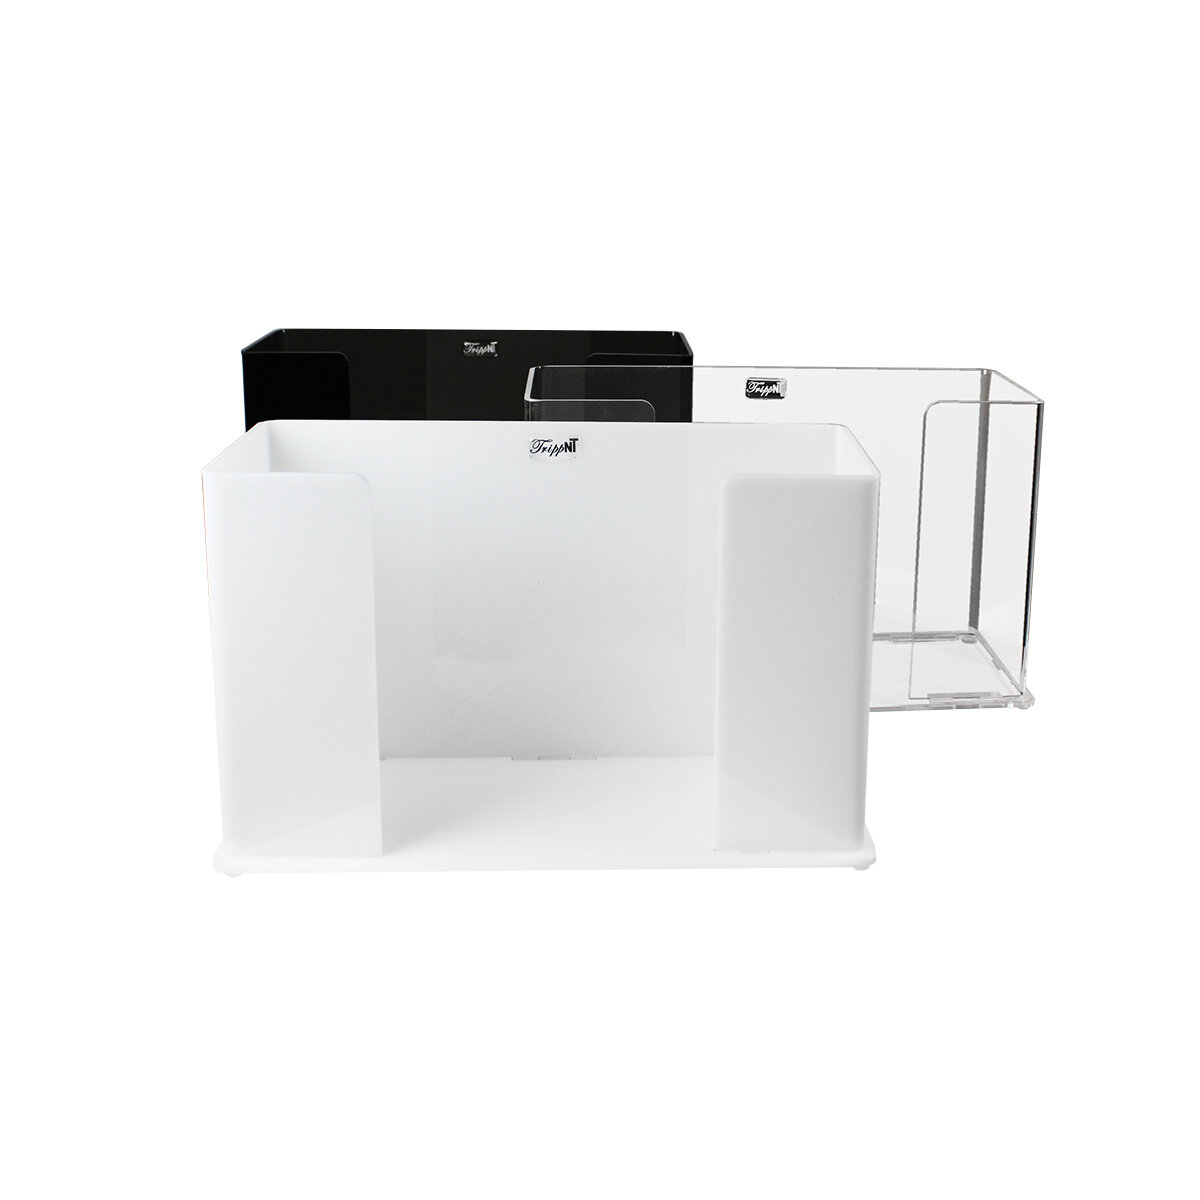 11 TrippNT 52914 Counter Top Black Acrylic Fold/Multifold Paper Towel Dispenser 